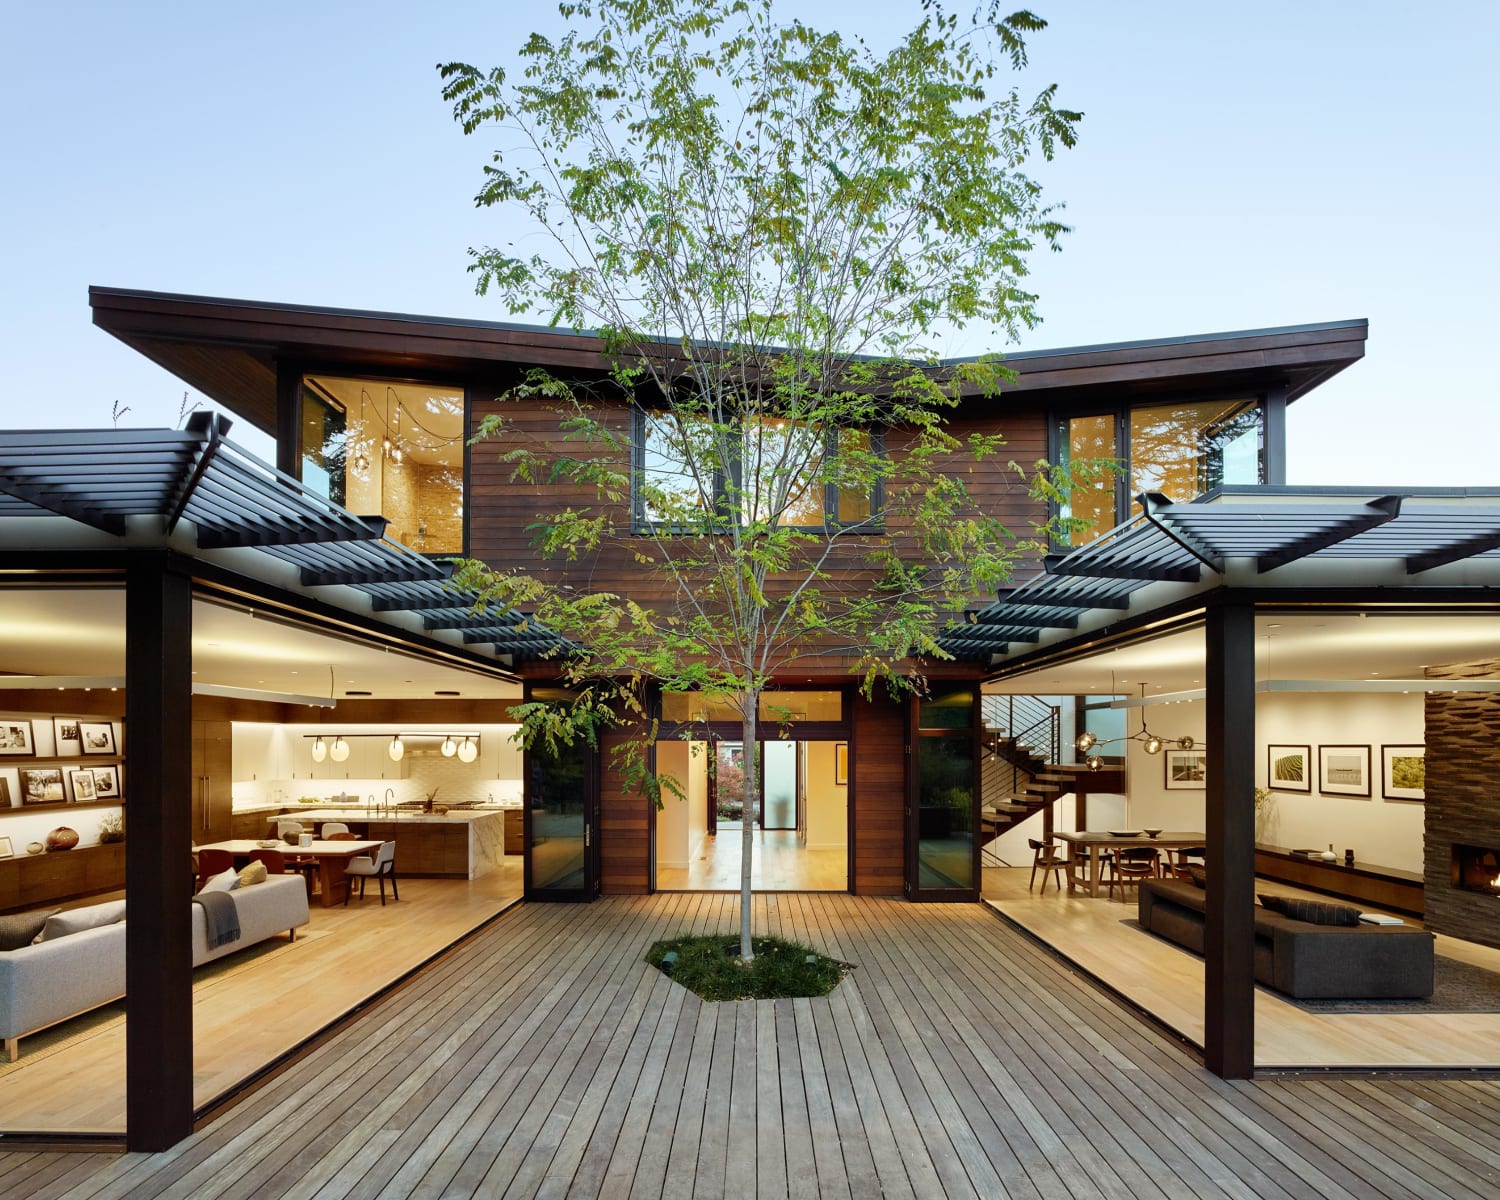 Residence with a spacious courtyard at the center of two wings, Bay Area, California by William Duff Architects (Photo: Matthew Millman)